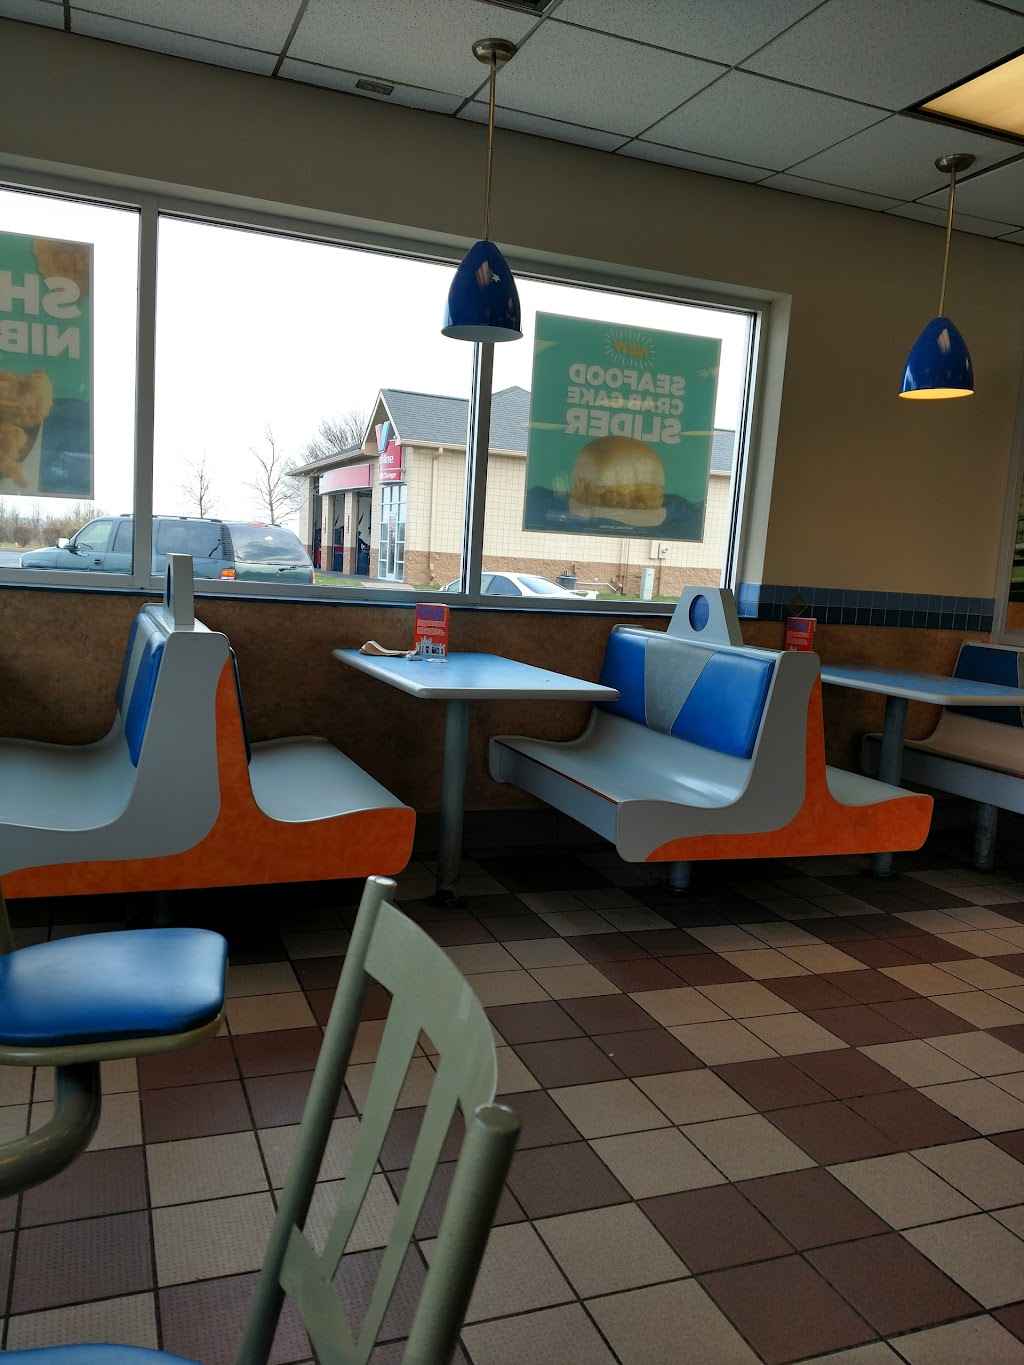 White Castle | 125 Plaza Dr, Cold Spring, KY 41076, USA | Phone: (859) 442-7698